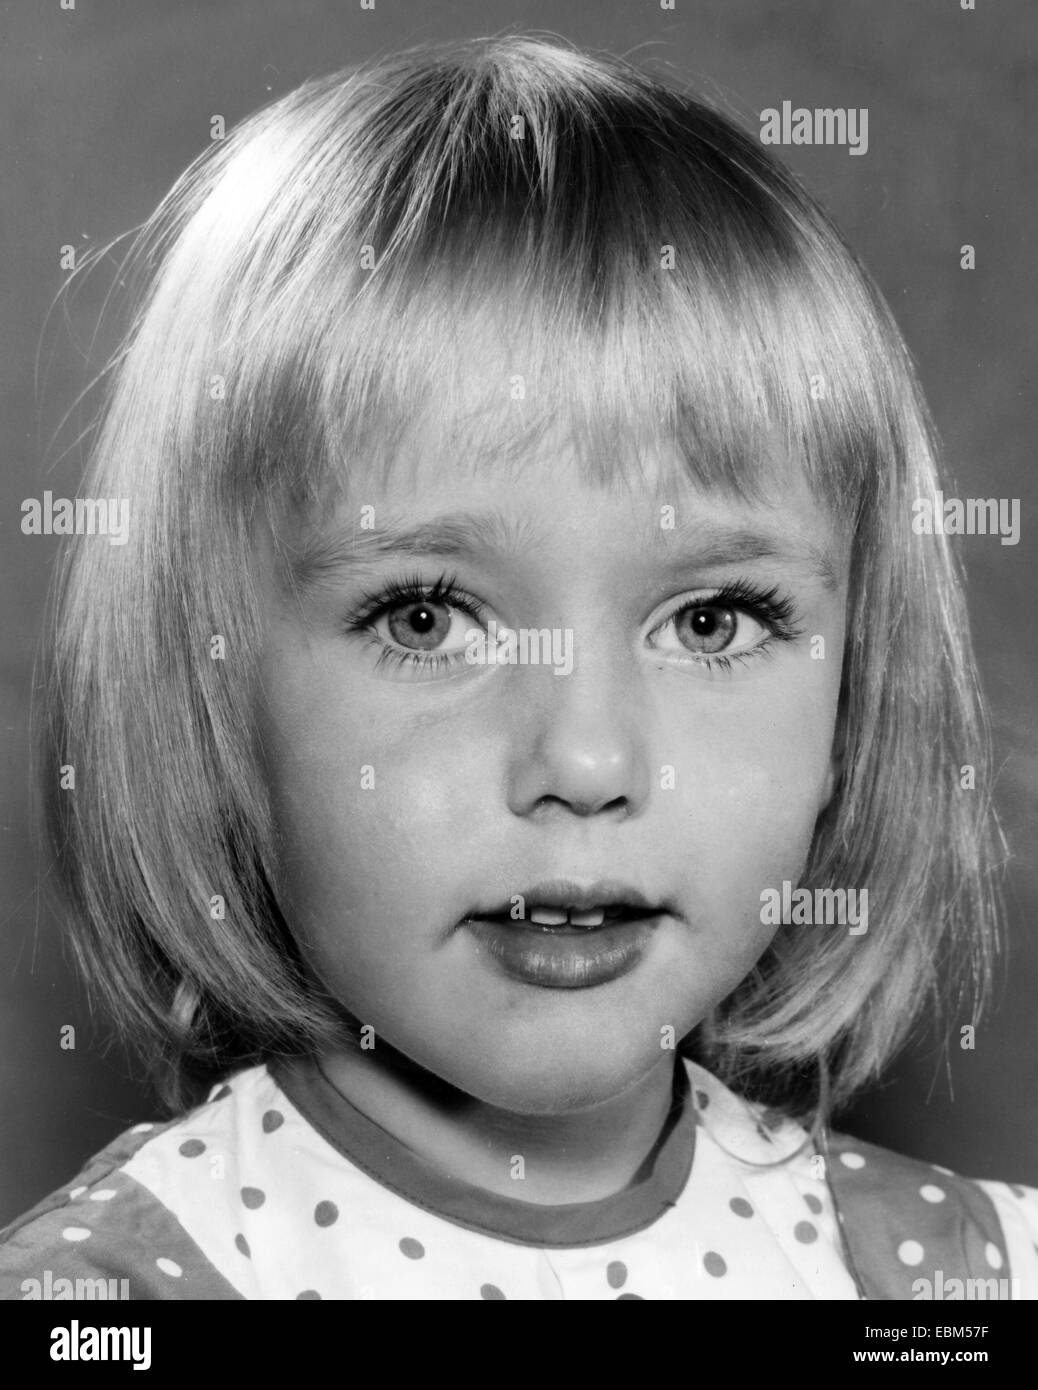 Young girl child children Black and White Stock Photos & Images - Alamy